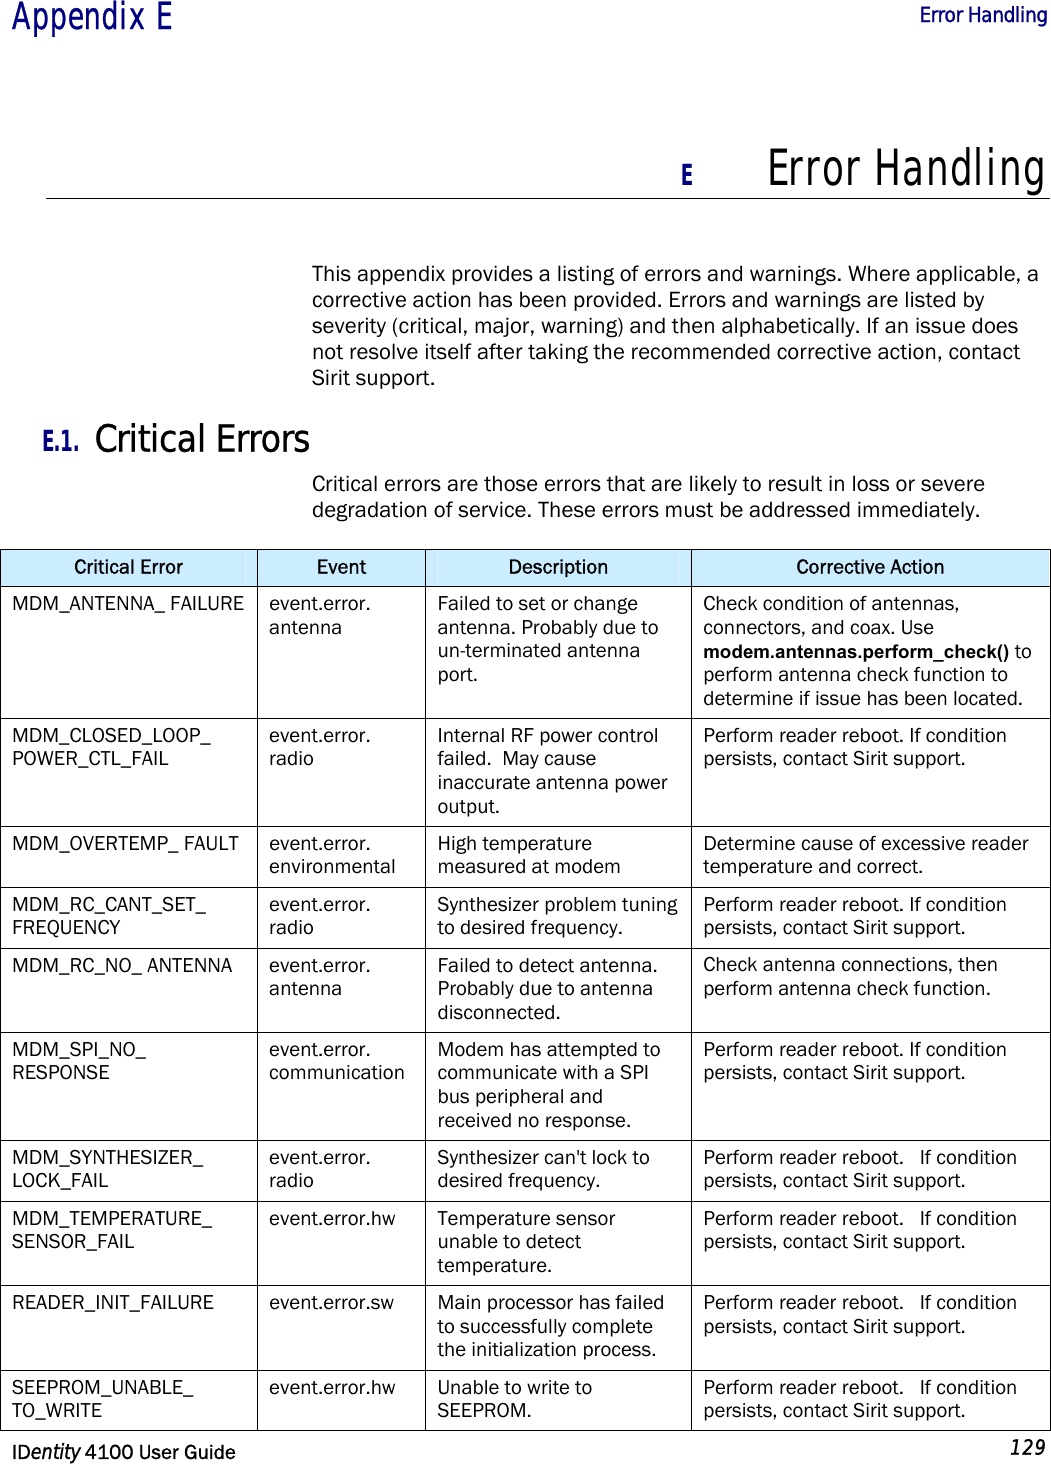  Appendix E  Error Handling   IDentity 4100 User Guide  129  E Error Handling  This appendix provides a listing of errors and warnings. Where applicable, a corrective action has been provided. Errors and warnings are listed by severity (critical, major, warning) and then alphabetically. If an issue does not resolve itself after taking the recommended corrective action, contact Sirit support. E.1. Critical Errors Critical errors are those errors that are likely to result in loss or severe degradation of service. These errors must be addressed immediately. Critical Error  Event  Description  Corrective Action MDM_ANTENNA_ FAILURE event.error. antenna Failed to set or change antenna. Probably due to un-terminated antenna port. Check condition of antennas, connectors, and coax. Use modem.antennas.perform_check() to perform antenna check function to determine if issue has been located. MDM_CLOSED_LOOP_ POWER_CTL_FAIL event.error. radio Internal RF power control failed.  May cause inaccurate antenna power output. Perform reader reboot. If condition persists, contact Sirit support. MDM_OVERTEMP_ FAULT  event.error. environmental High temperature measured at modem Determine cause of excessive reader temperature and correct. MDM_RC_CANT_SET_ FREQUENCY event.error. radio Synthesizer problem tuning to desired frequency. Perform reader reboot. If condition persists, contact Sirit support. MDM_RC_NO_ ANTENNA  event.error. antenna Failed to detect antenna. Probably due to antenna disconnected. Check antenna connections, then perform antenna check function. MDM_SPI_NO_ RESPONSE event.error. communication Modem has attempted to communicate with a SPI bus peripheral and received no response. Perform reader reboot. If condition persists, contact Sirit support. MDM_SYNTHESIZER_ LOCK_FAIL event.error. radio Synthesizer can&apos;t lock to desired frequency. Perform reader reboot.   If condition persists, contact Sirit support. MDM_TEMPERATURE_ SENSOR_FAIL event.error.hw Temperature sensor unable to detect temperature. Perform reader reboot.   If condition persists, contact Sirit support. READER_INIT_FAILURE  event.error.sw  Main processor has failed to successfully complete the initialization process. Perform reader reboot.   If condition persists, contact Sirit support. SEEPROM_UNABLE_ TO_WRITE event.error.hw  Unable to write to SEEPROM. Perform reader reboot.   If condition persists, contact Sirit support. 